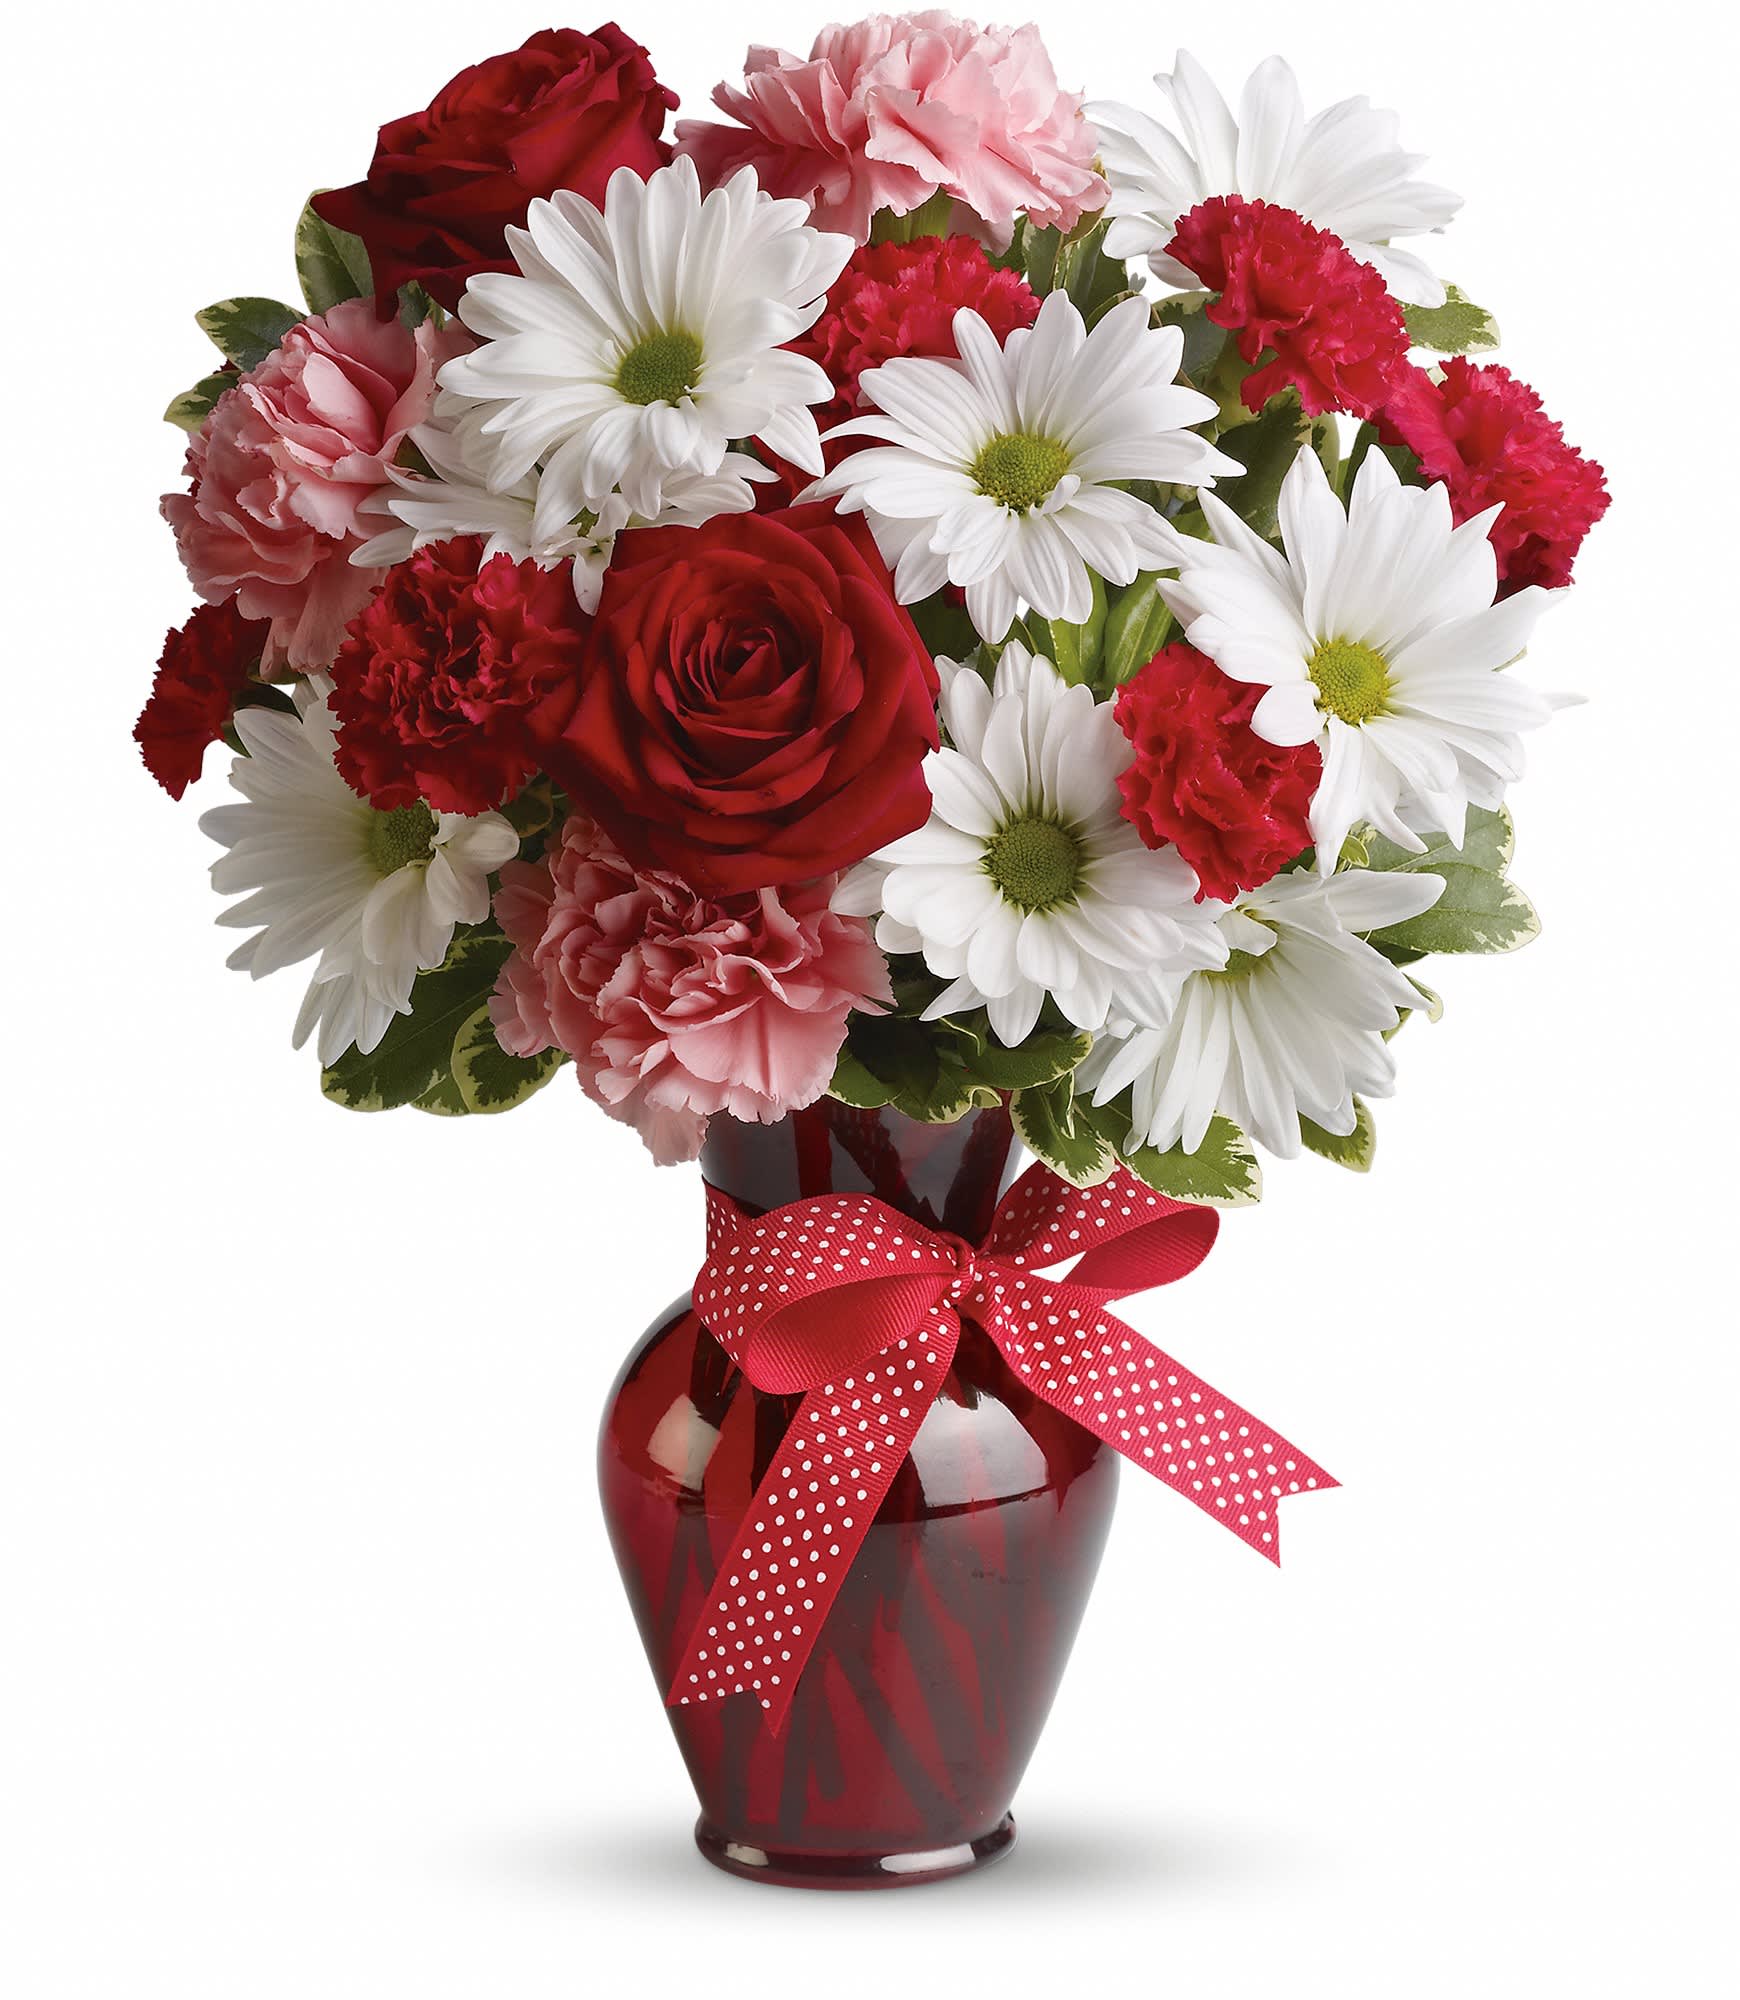 Hugs and Kisses - Delight your love with this beautiful bouquet of bright white chrysanthemums, precious pink carnations, romantic red roses and more in a radiant red vase. 